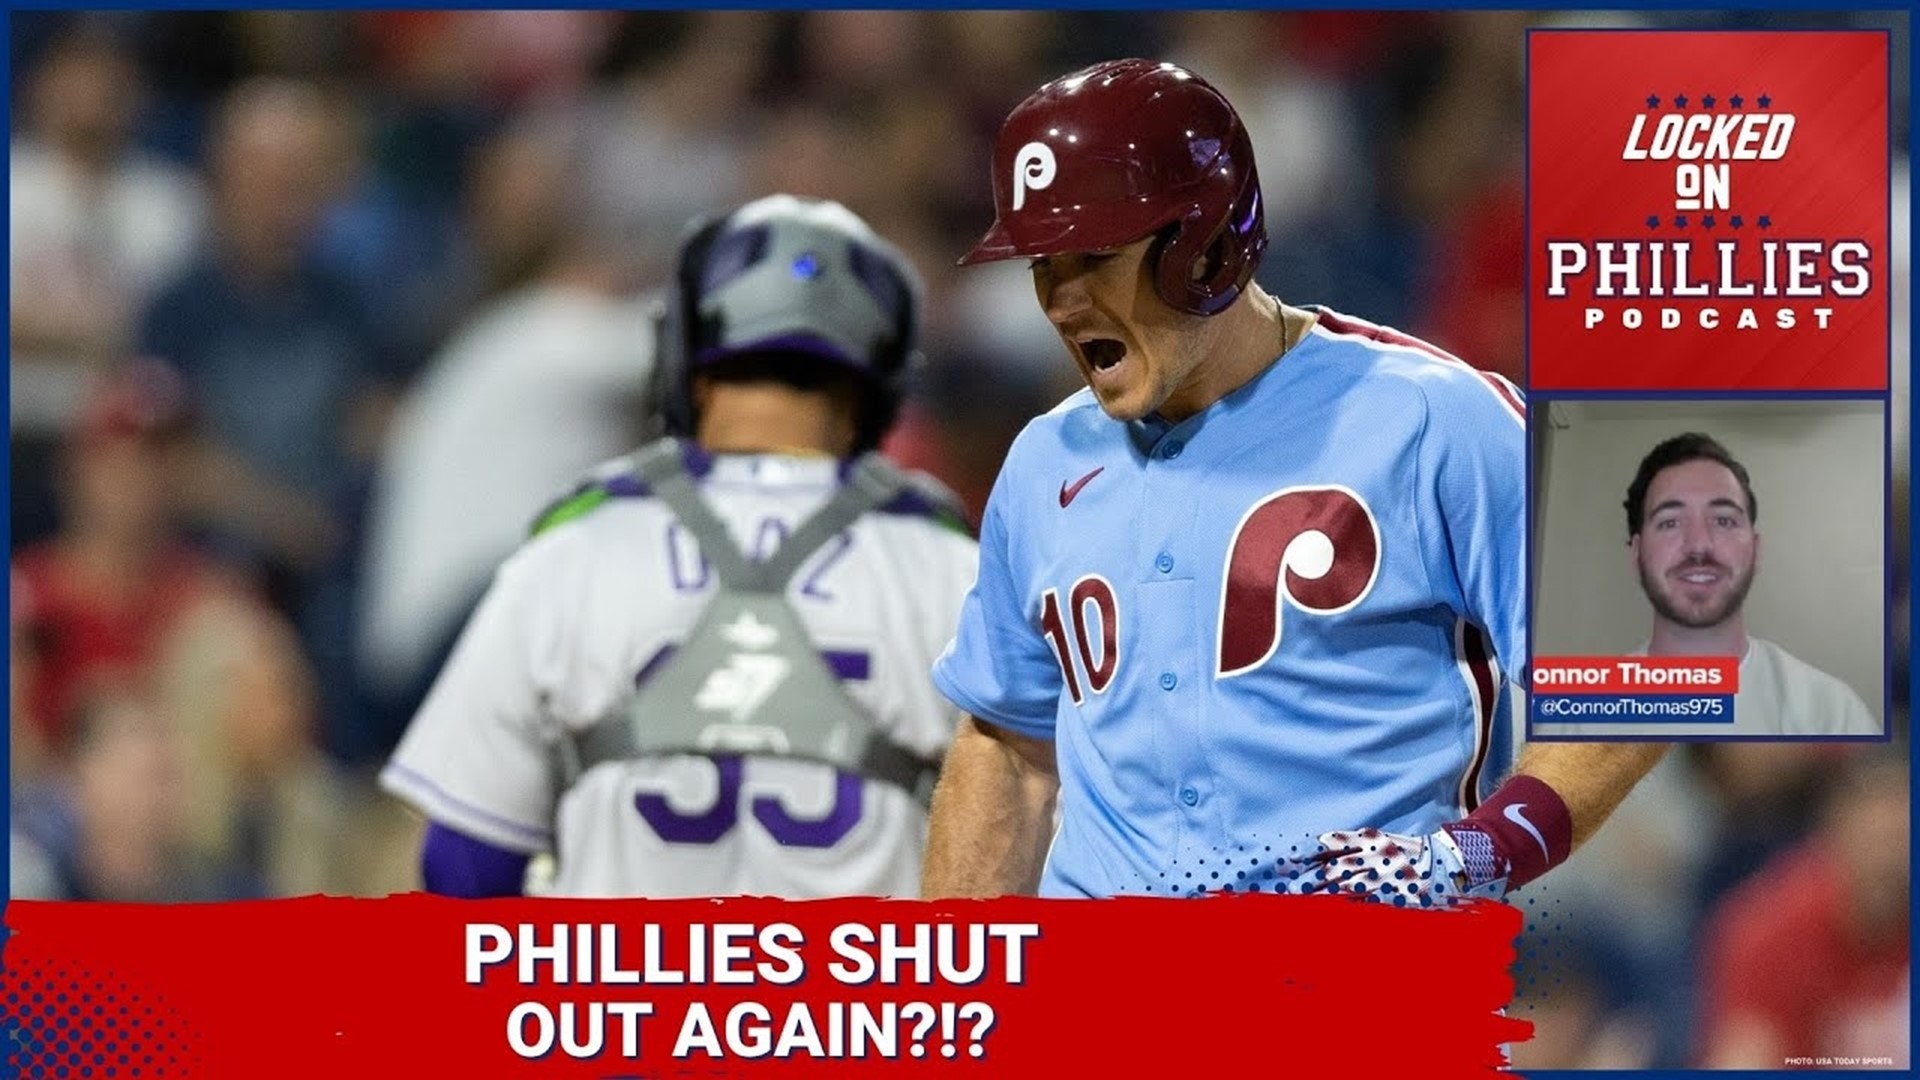 In today's episode, Connor discusses the Philadelphia Phillies' 5-0 loss to the Colorado Rockies in game 1 of the teams' 4 game series.